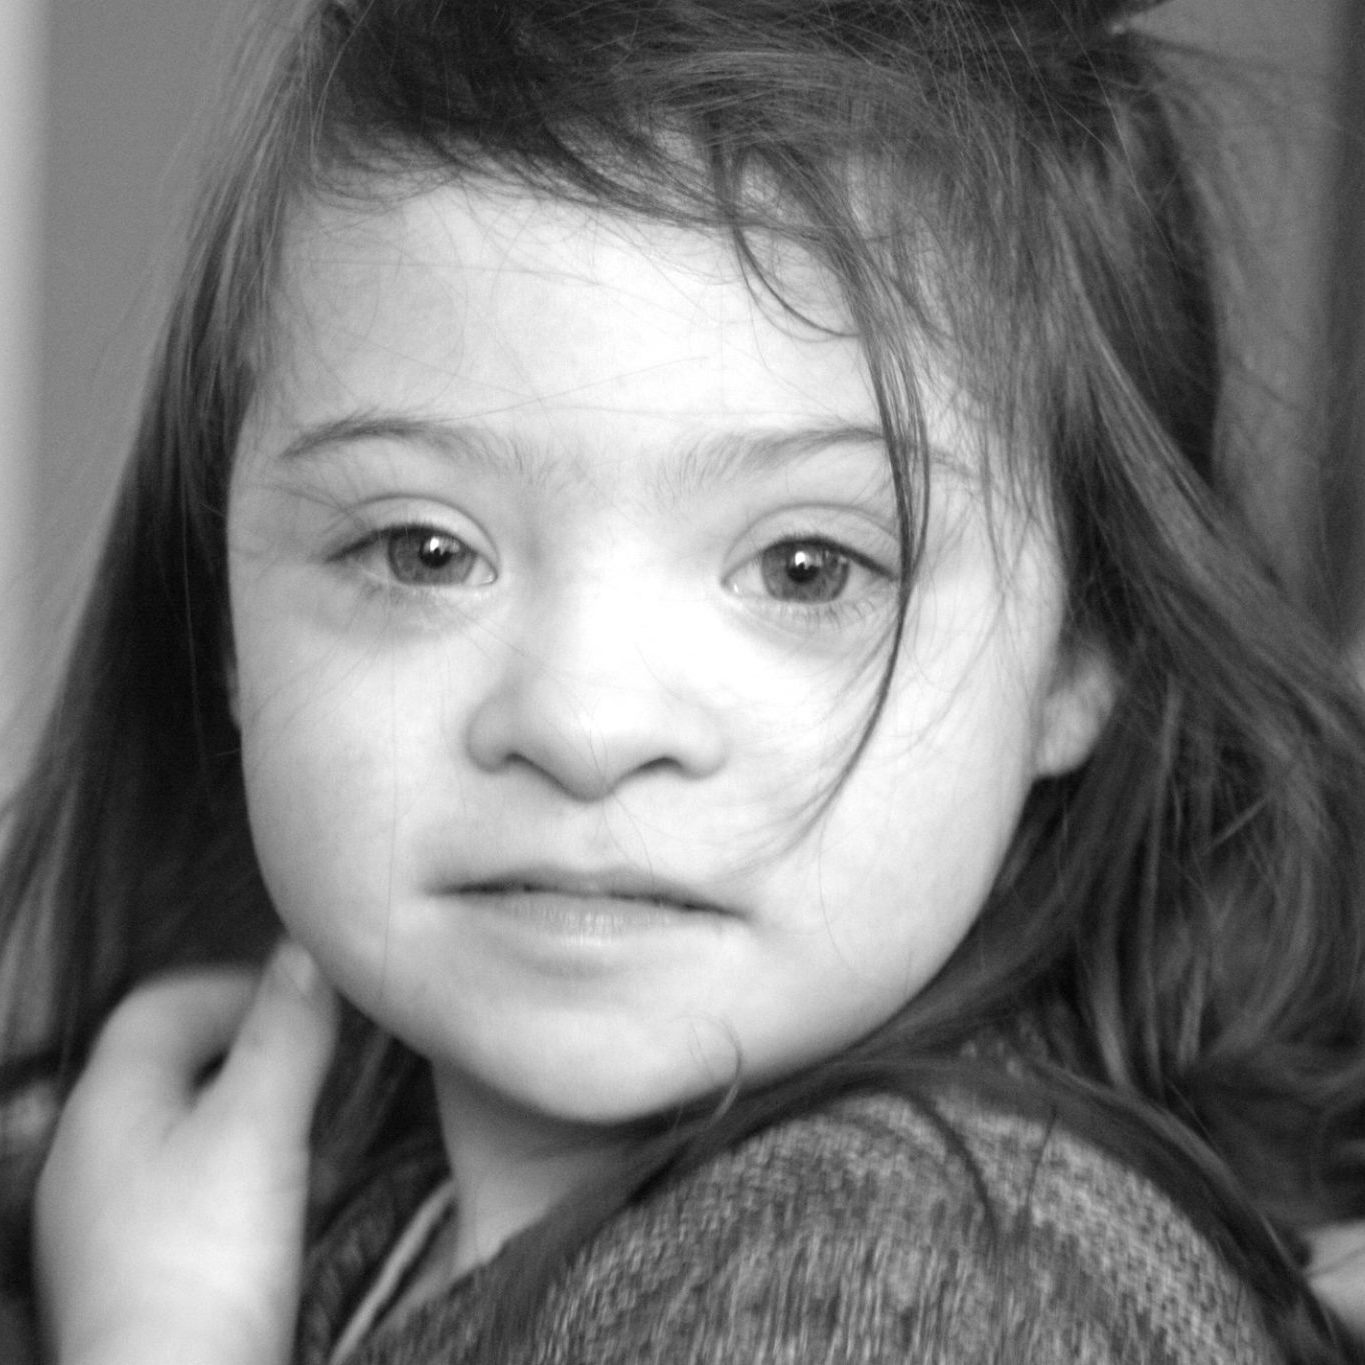 Black and white image of girl with Down syndrome -- closeup